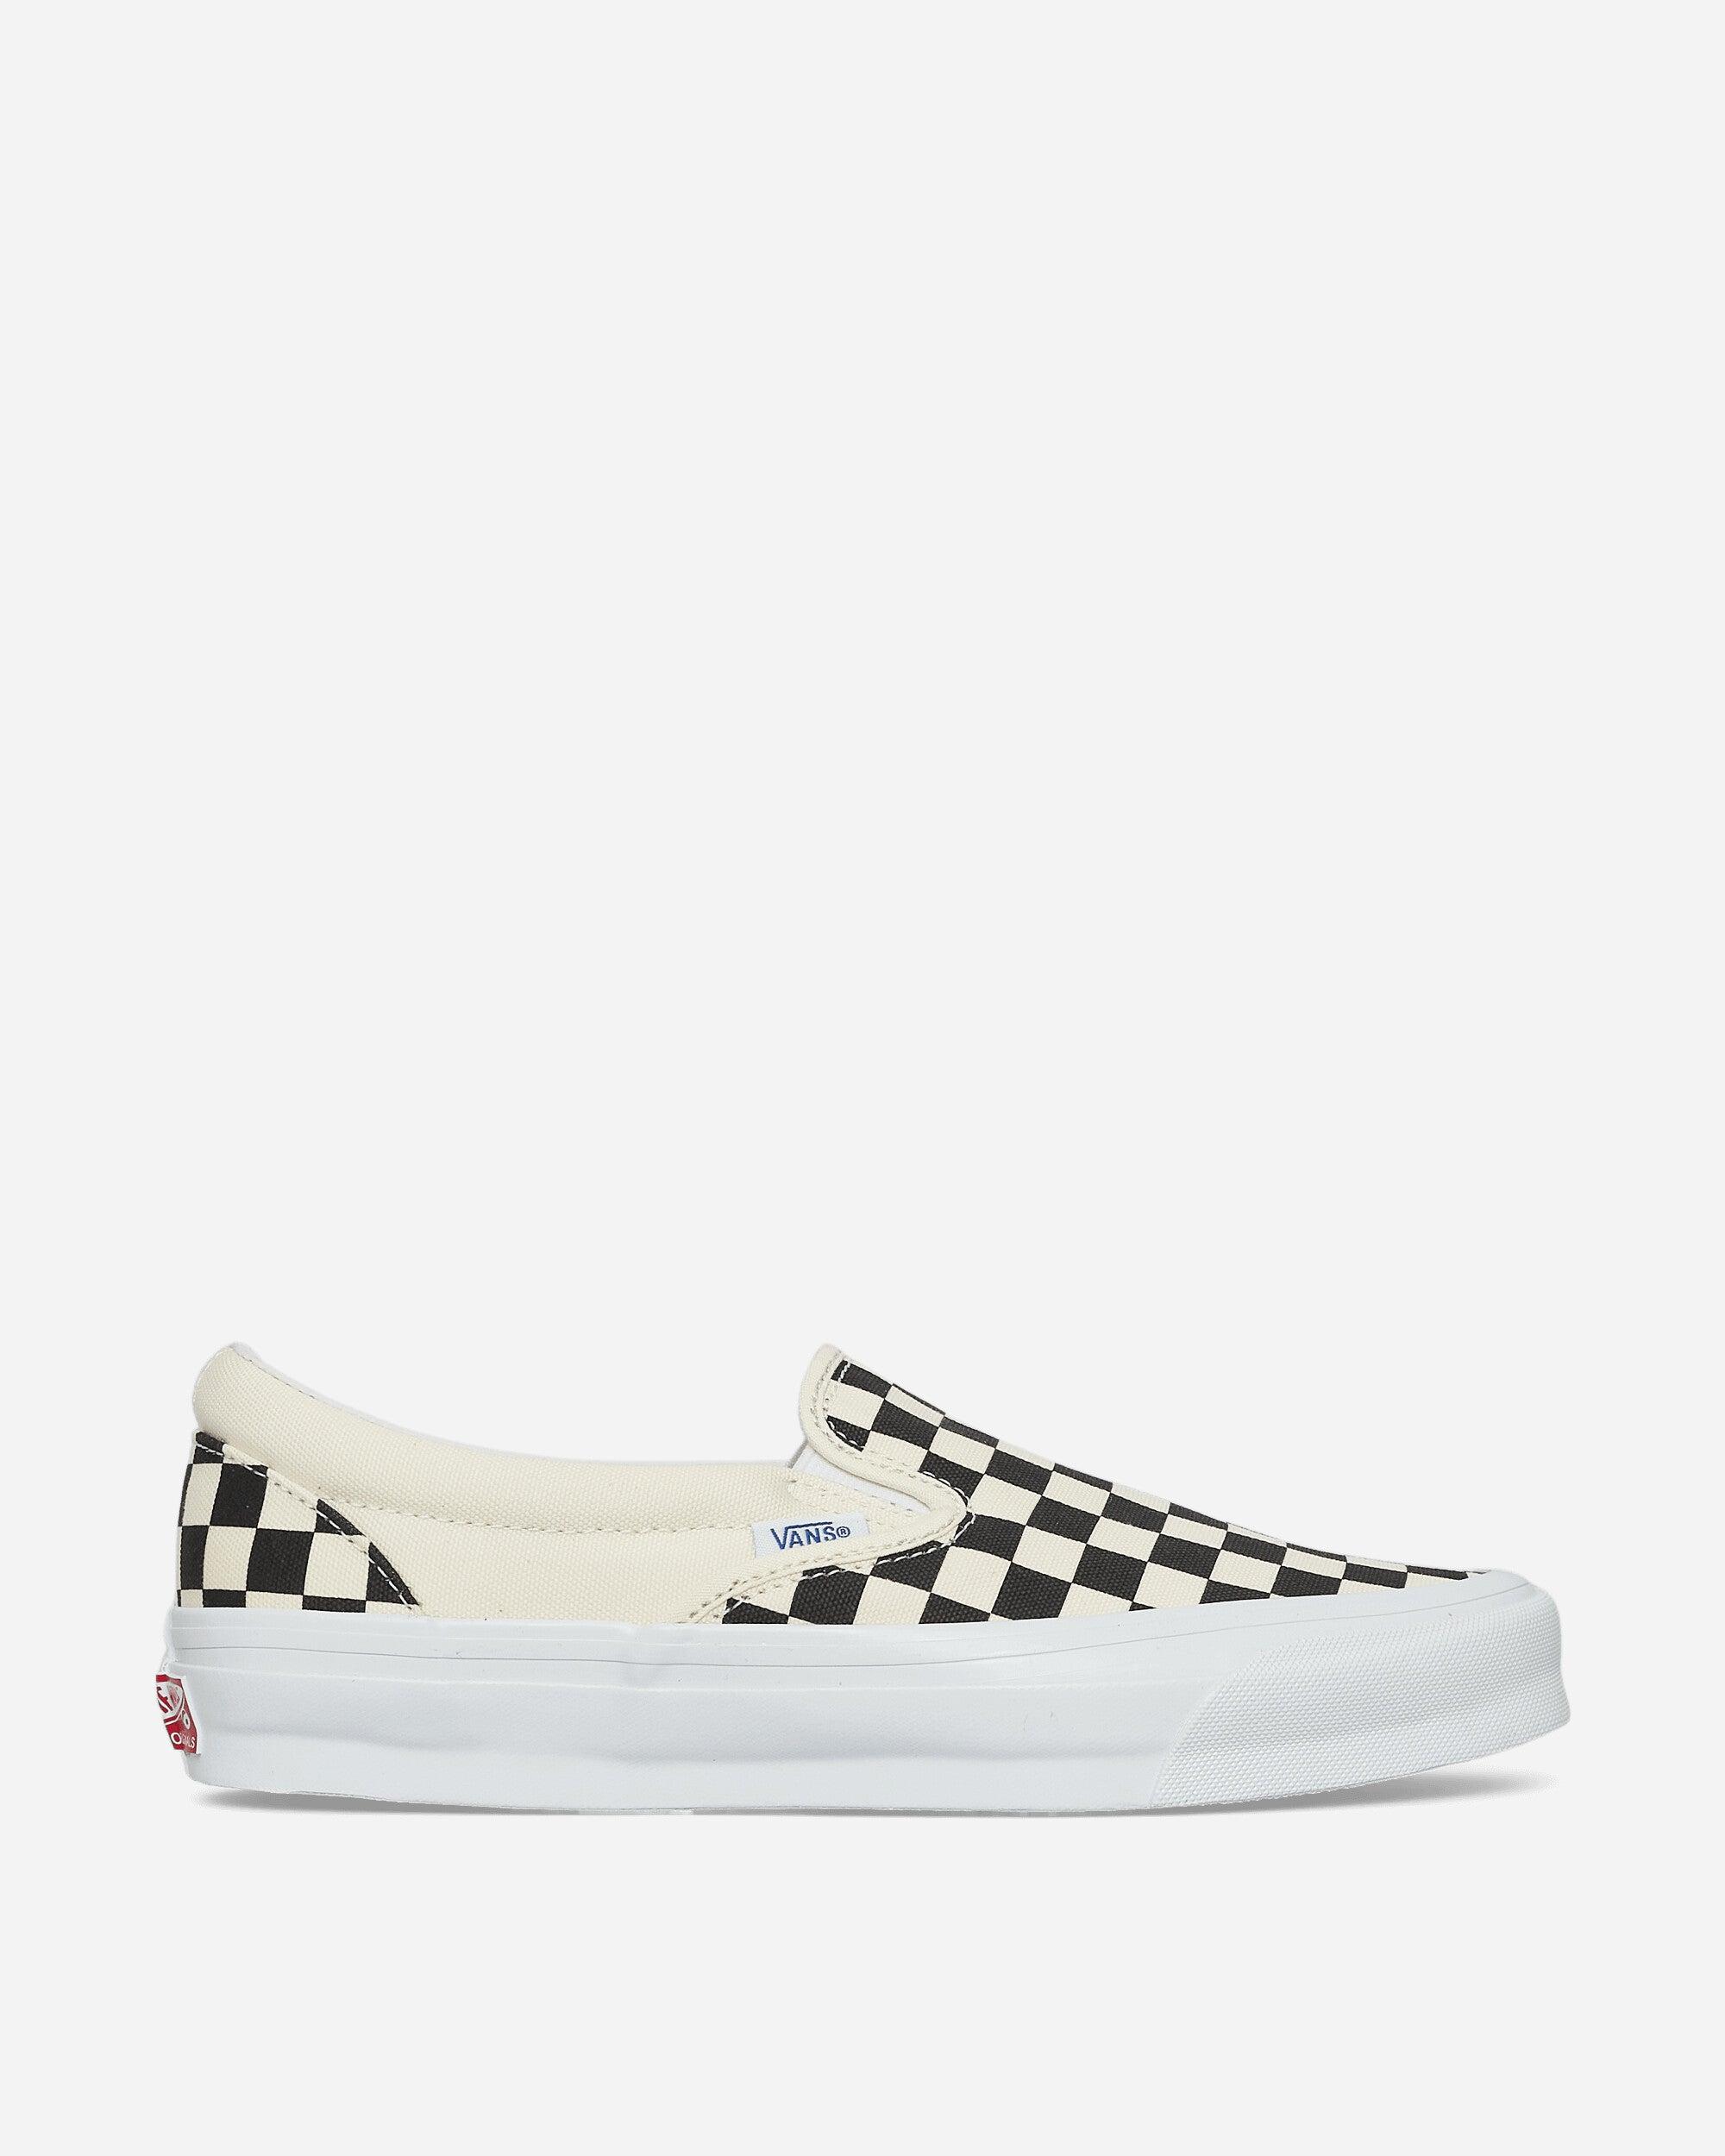 Vans Classic Slip-on Lx Sneakers Checkerboard in White for Men | Lyst